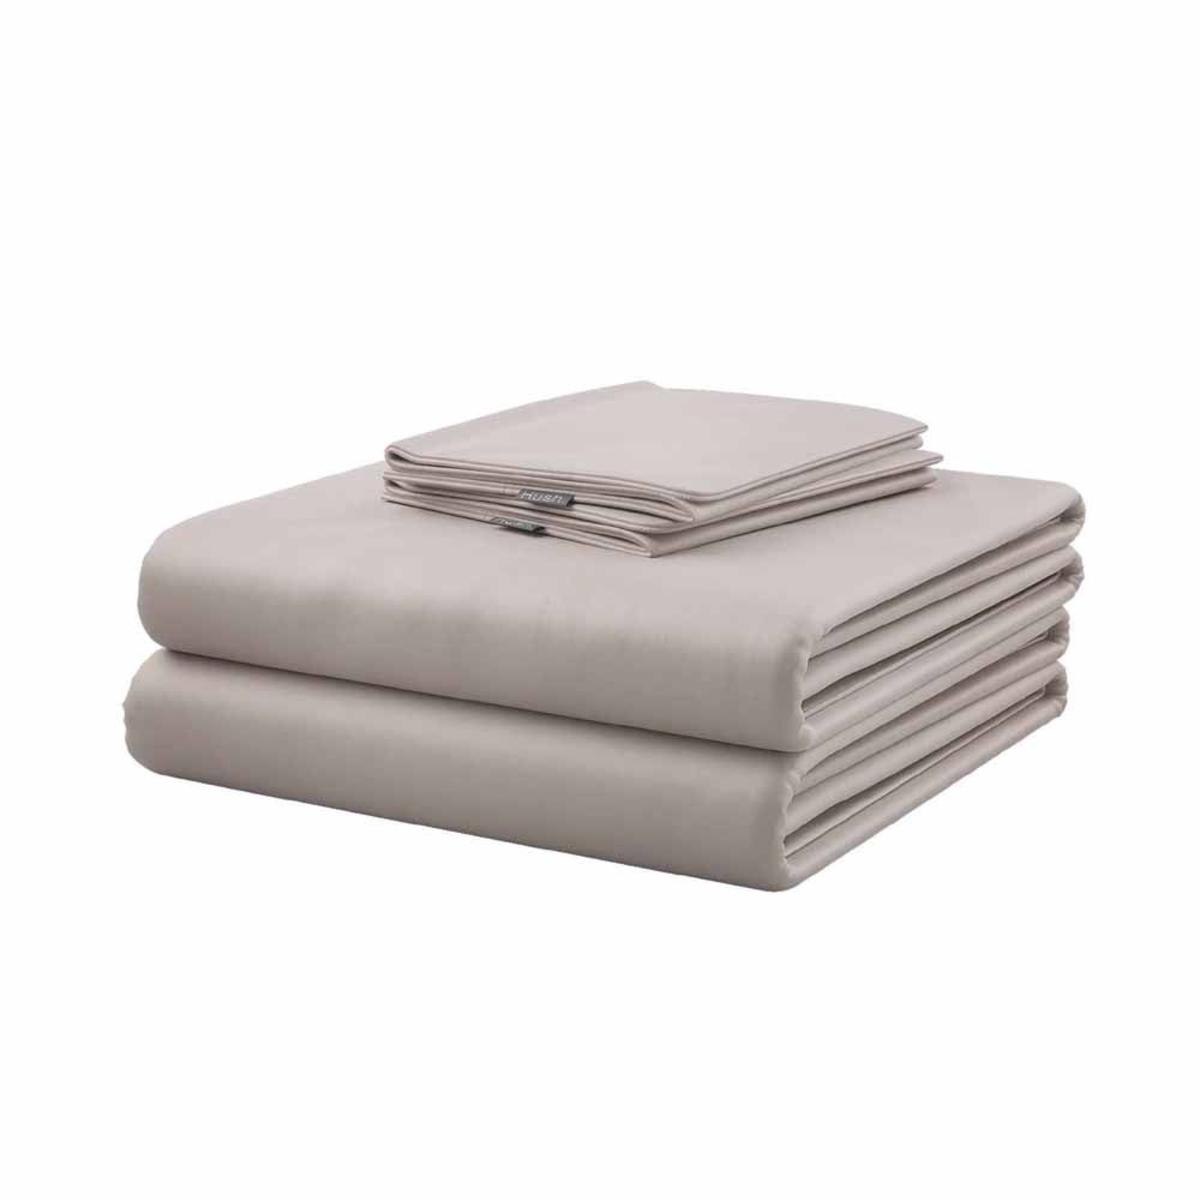 Hush Iced Cooling Sheet and Pillowcase Set - Queen